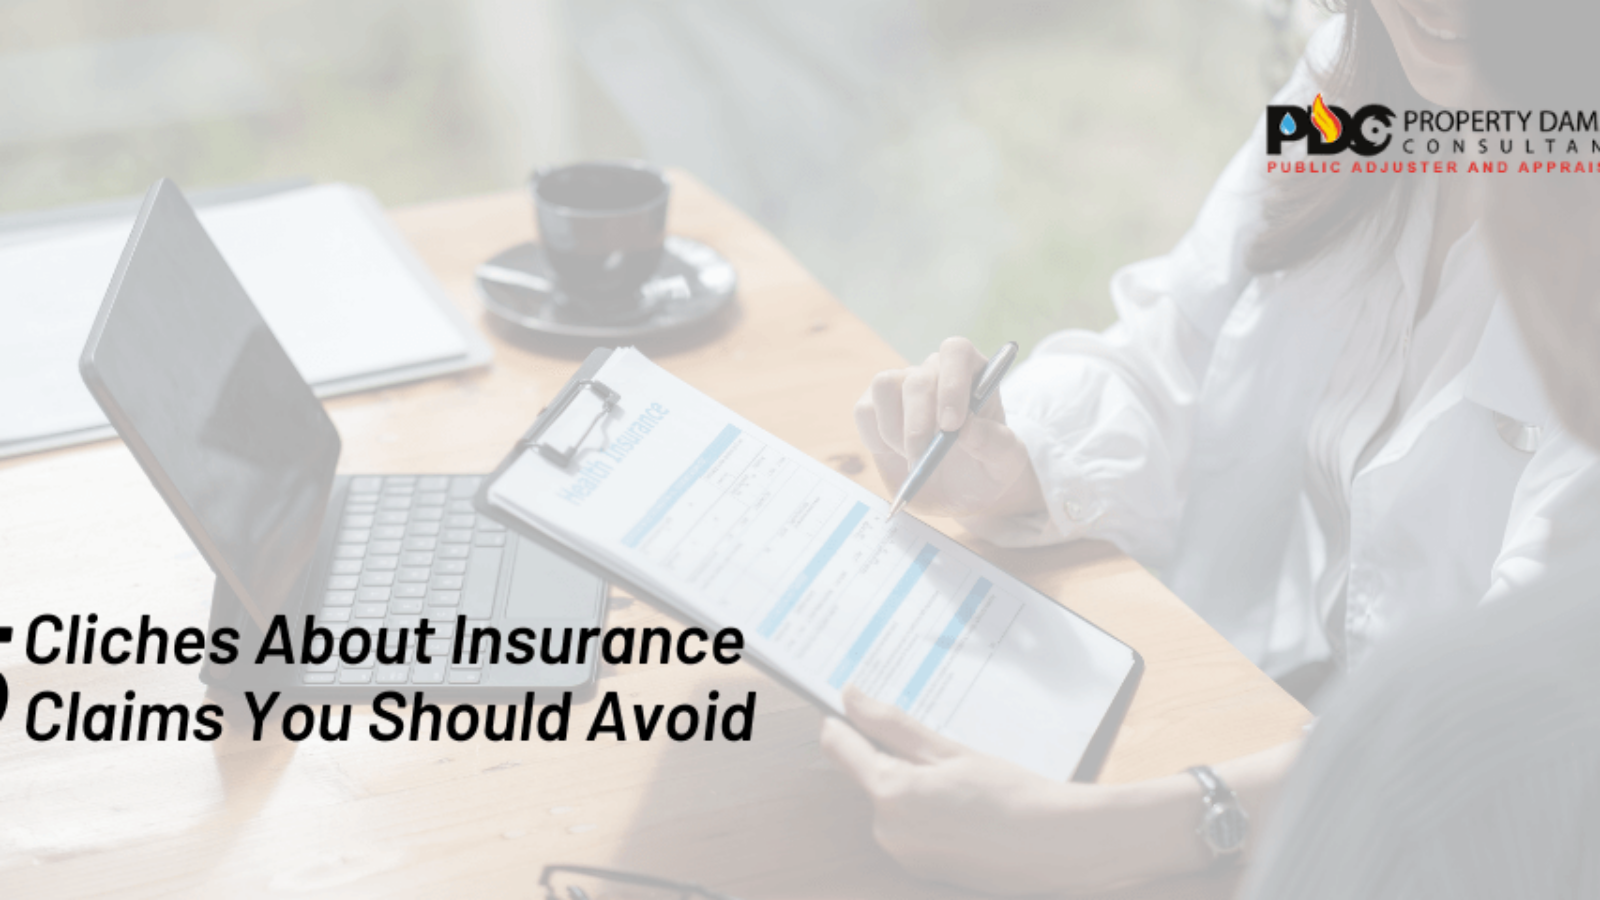 5-Cliches-About-Insurance-Claims-960x480